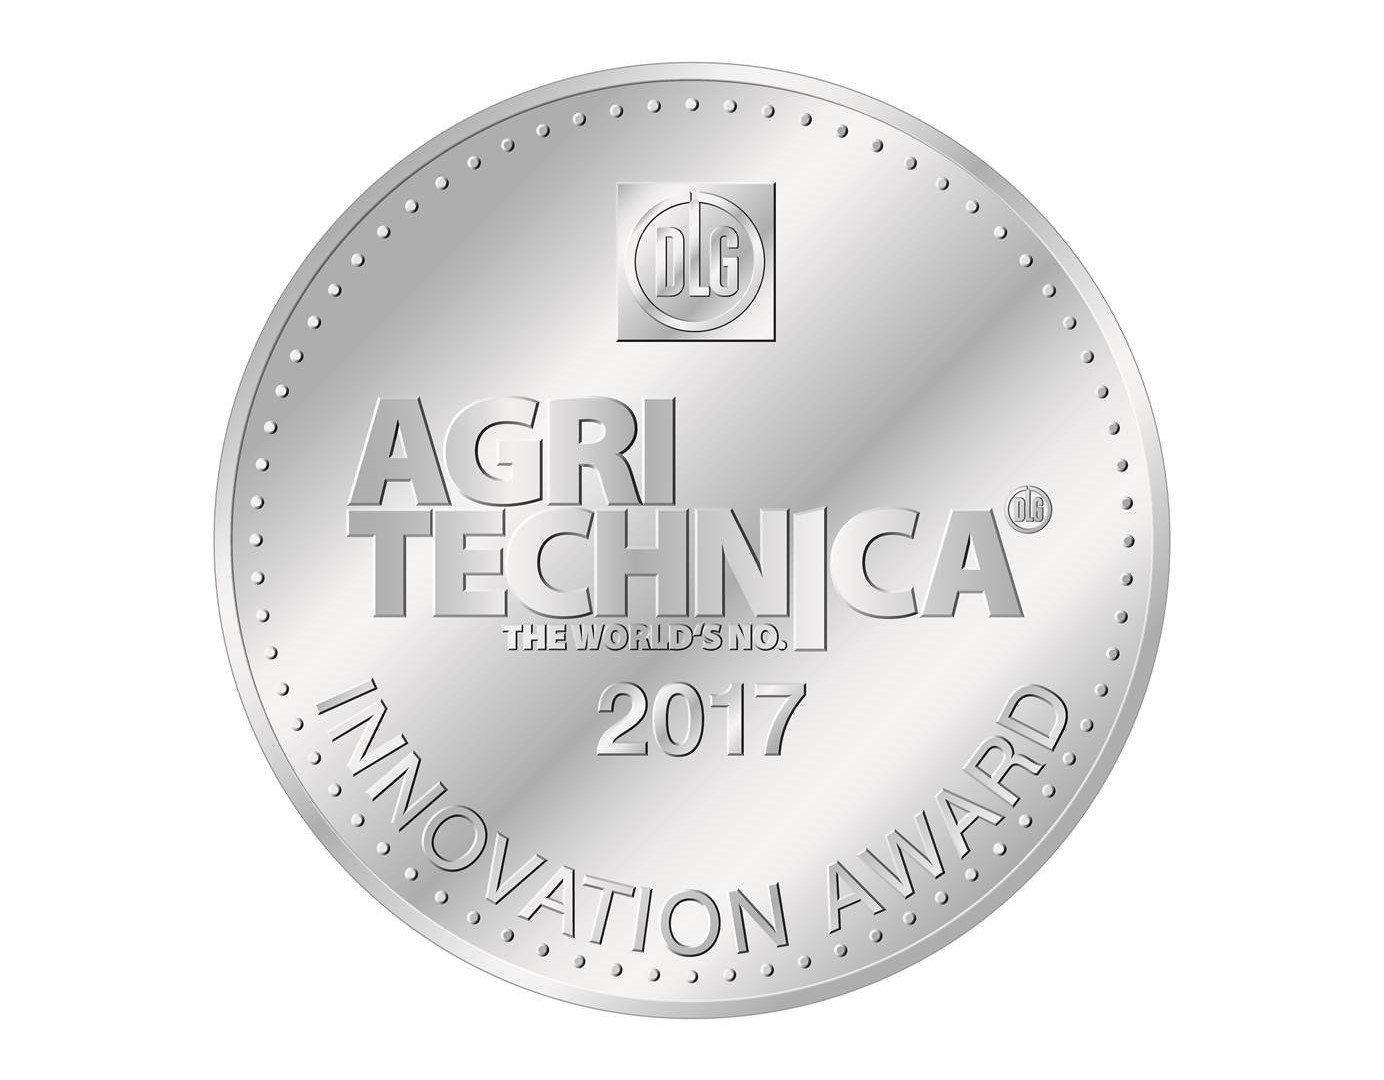 New Holland wins Silver Medal at the Agritechnica Innovation Award 2017